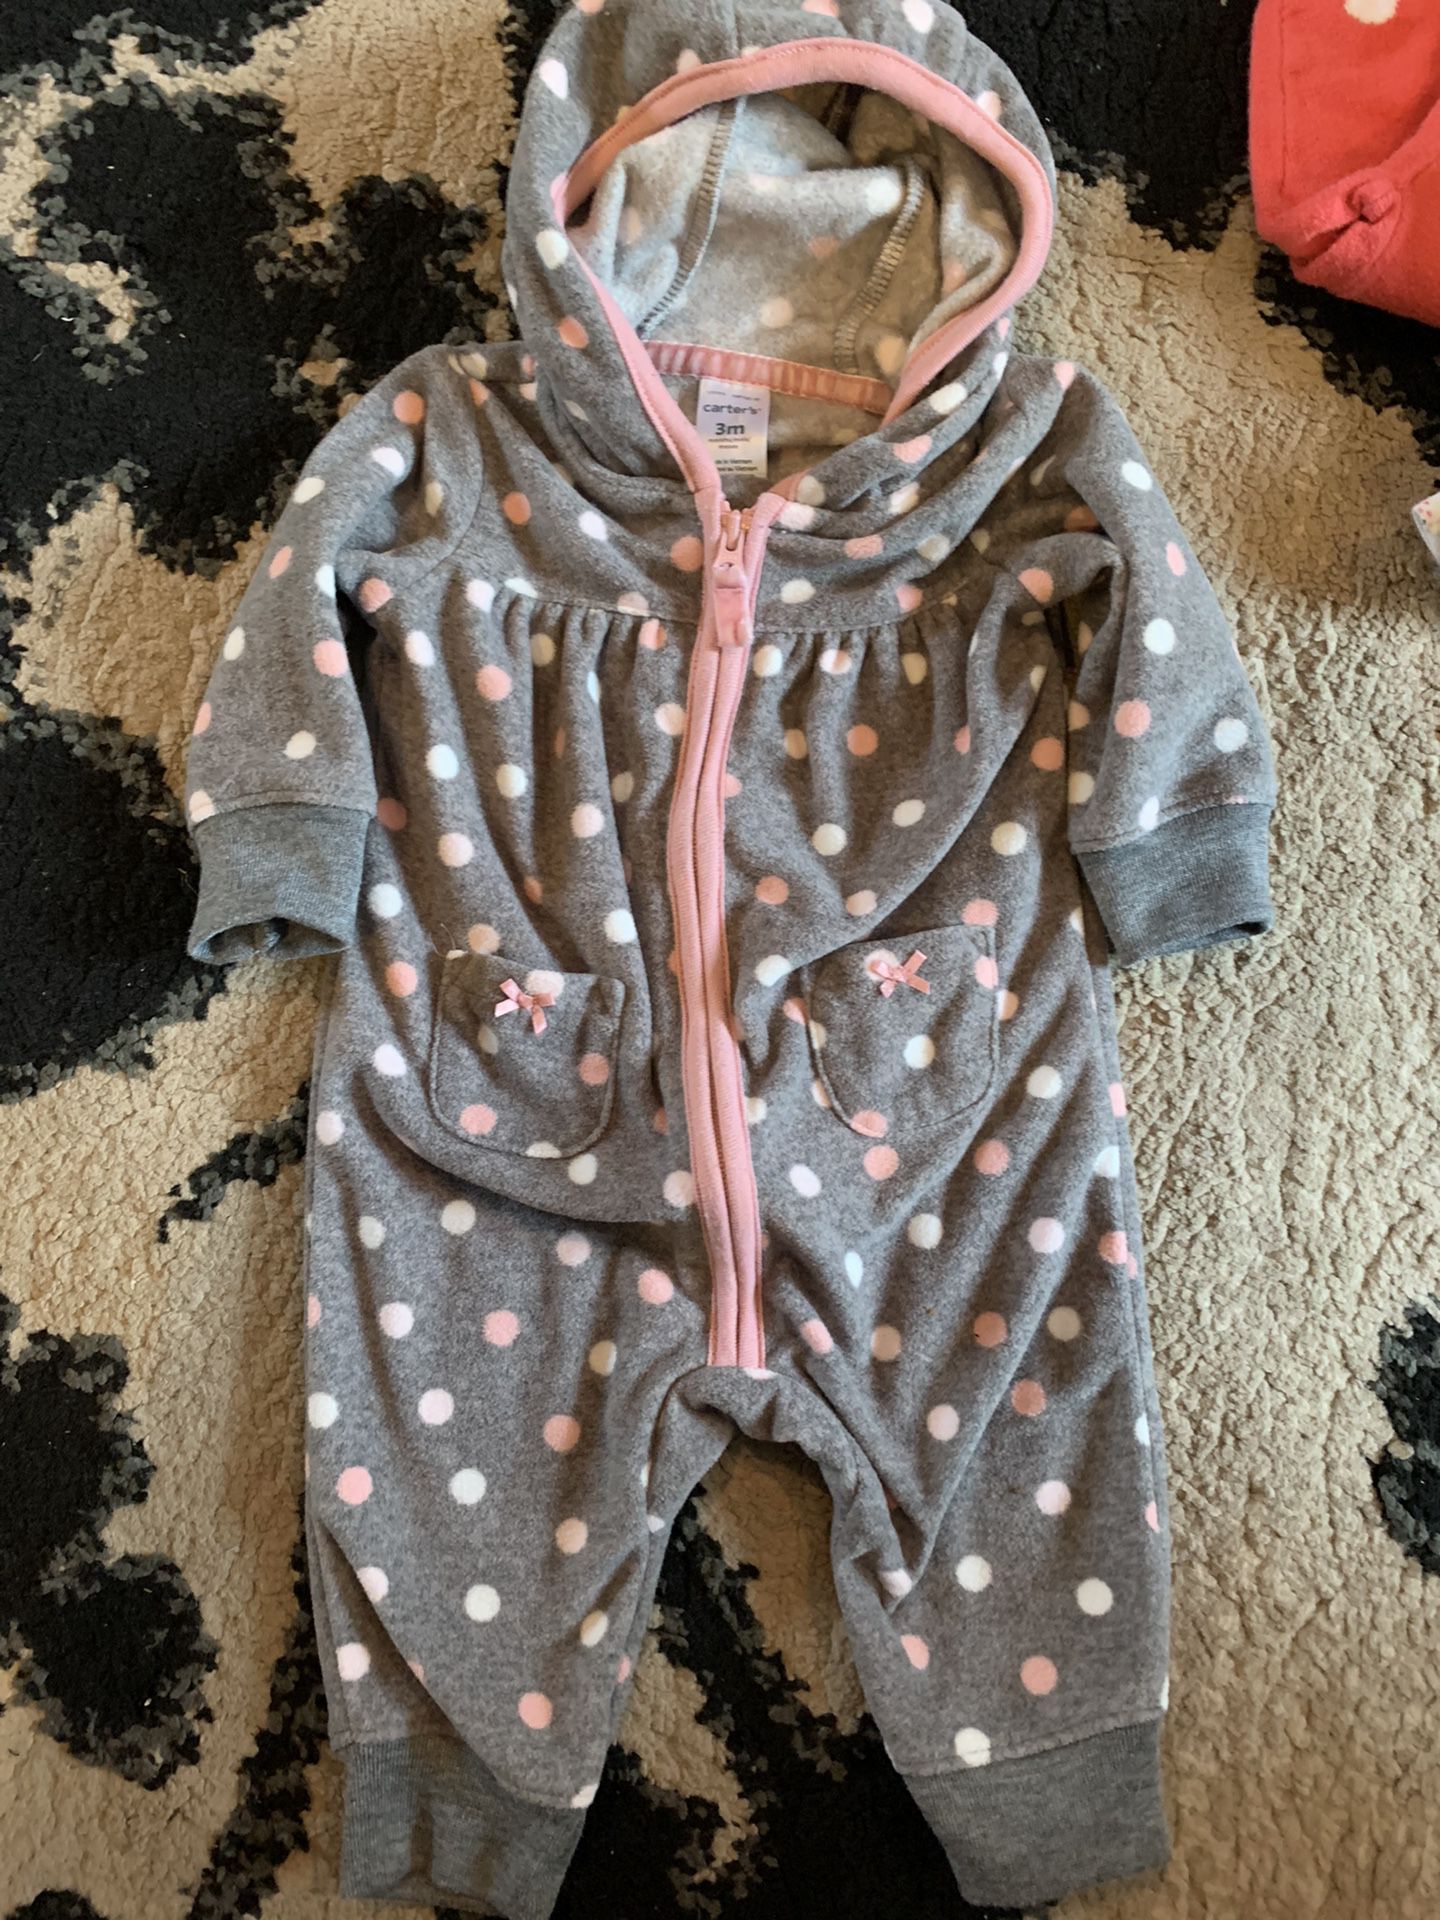 NWOT Carter’s 3 month cozy one piece grey & pink outfit  Never worn washed once  Super soft and cute  Smoke/ Pet free home  Pick up lynnwood or shippe